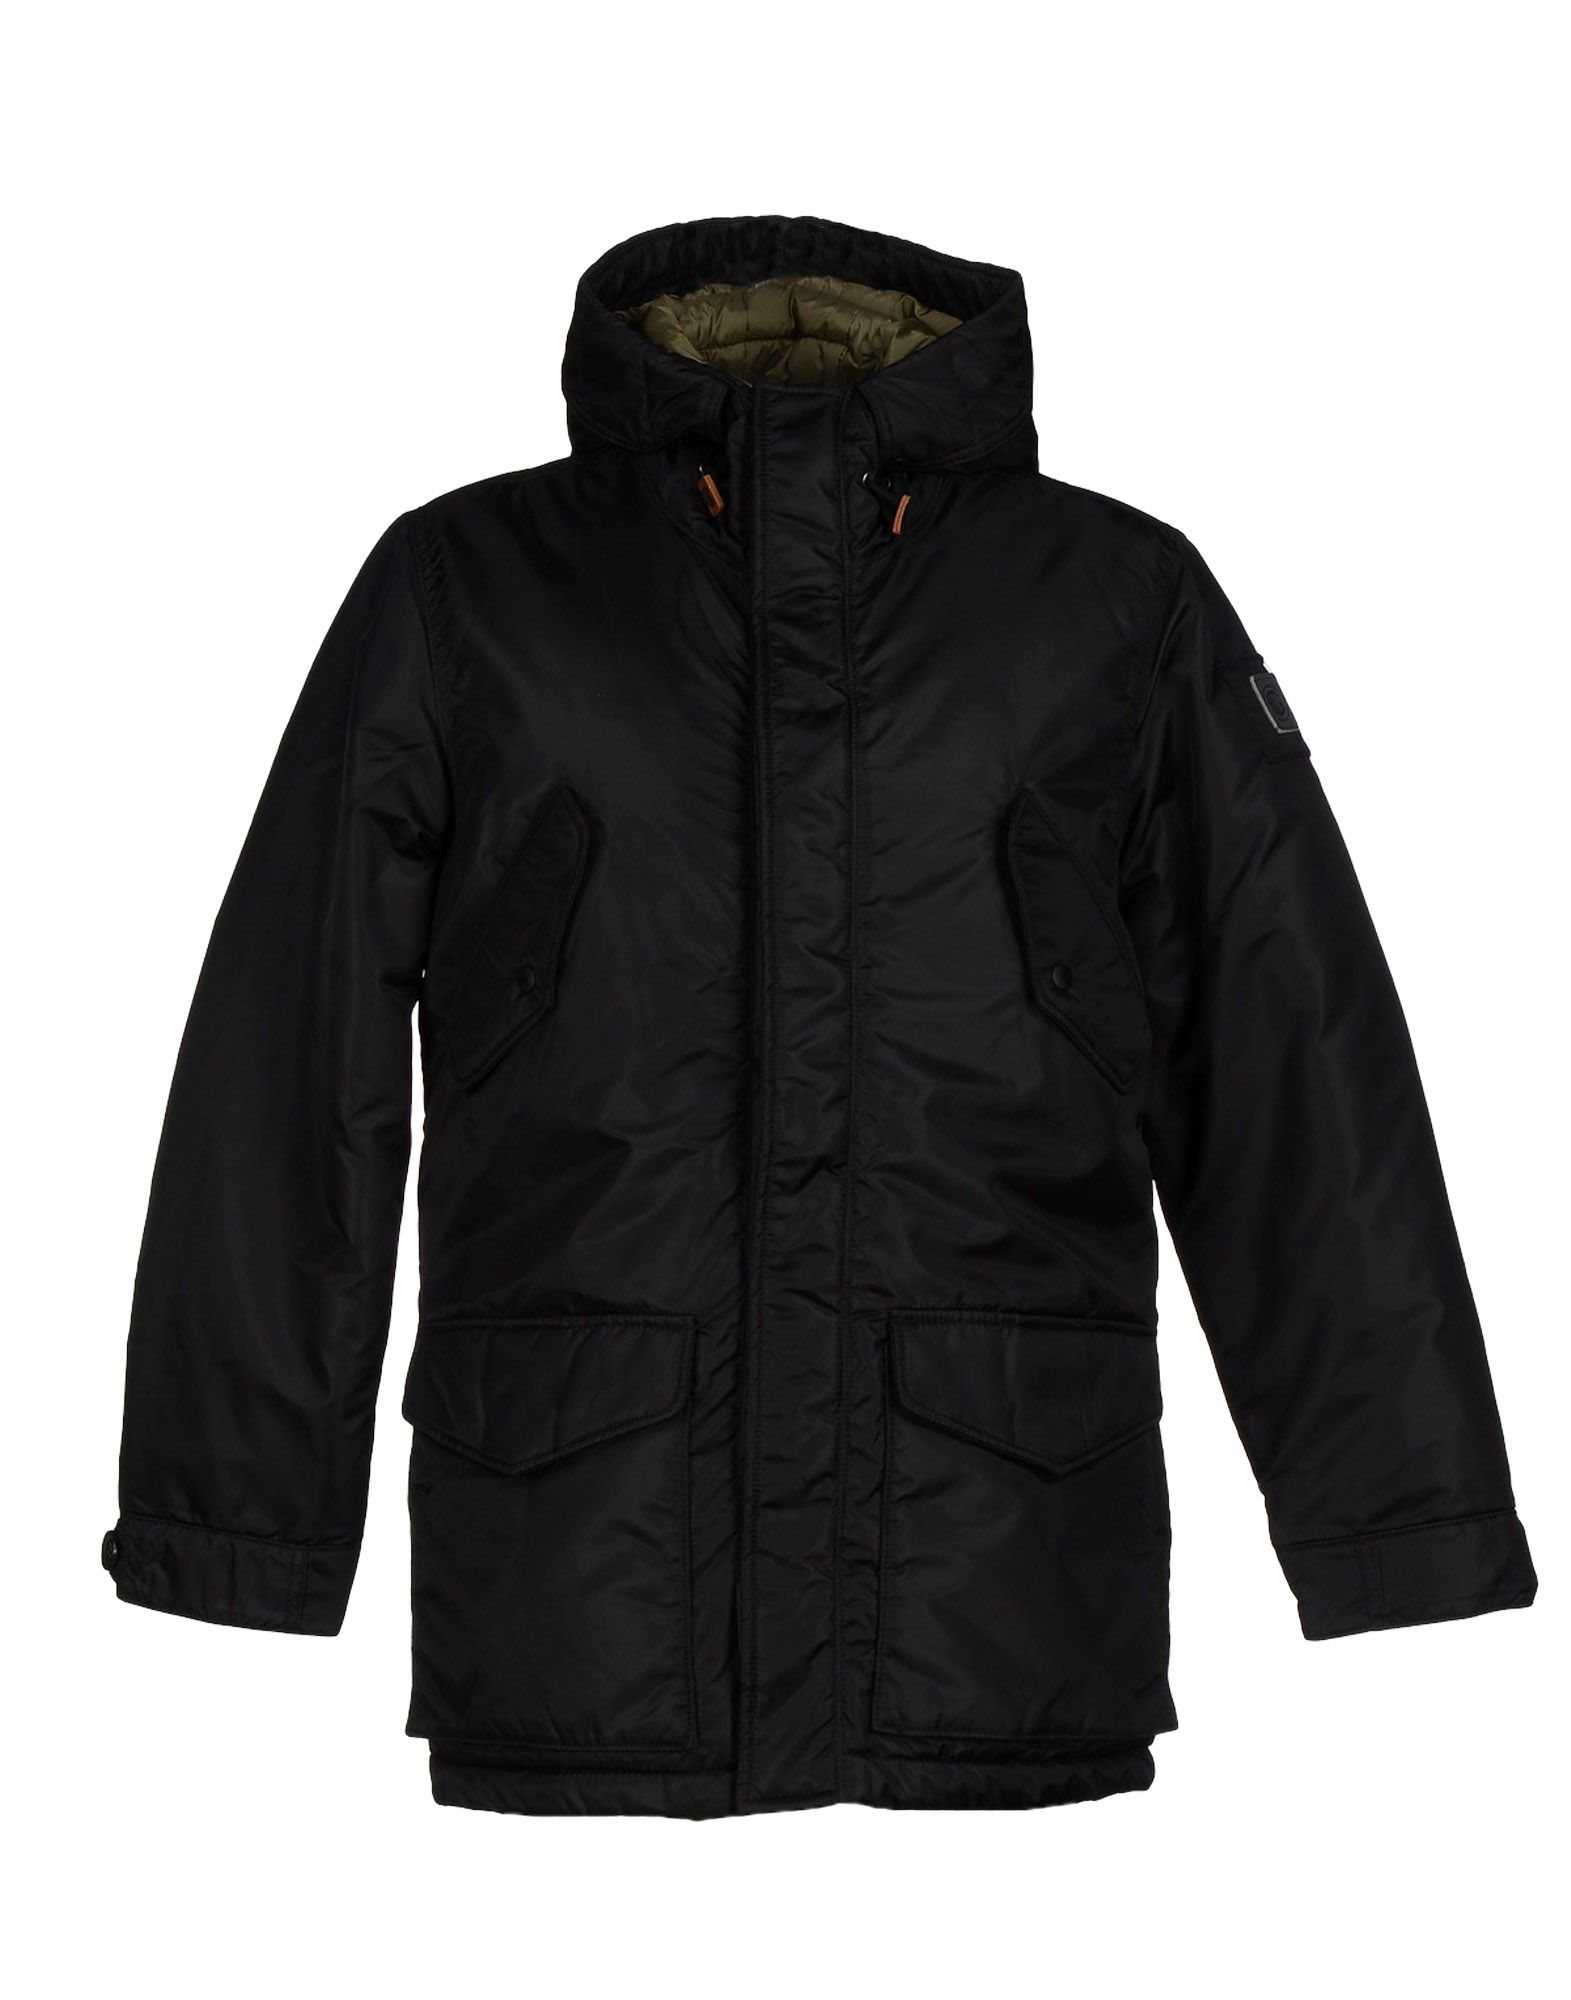 Lyst - Replay Jacket in Black for Men